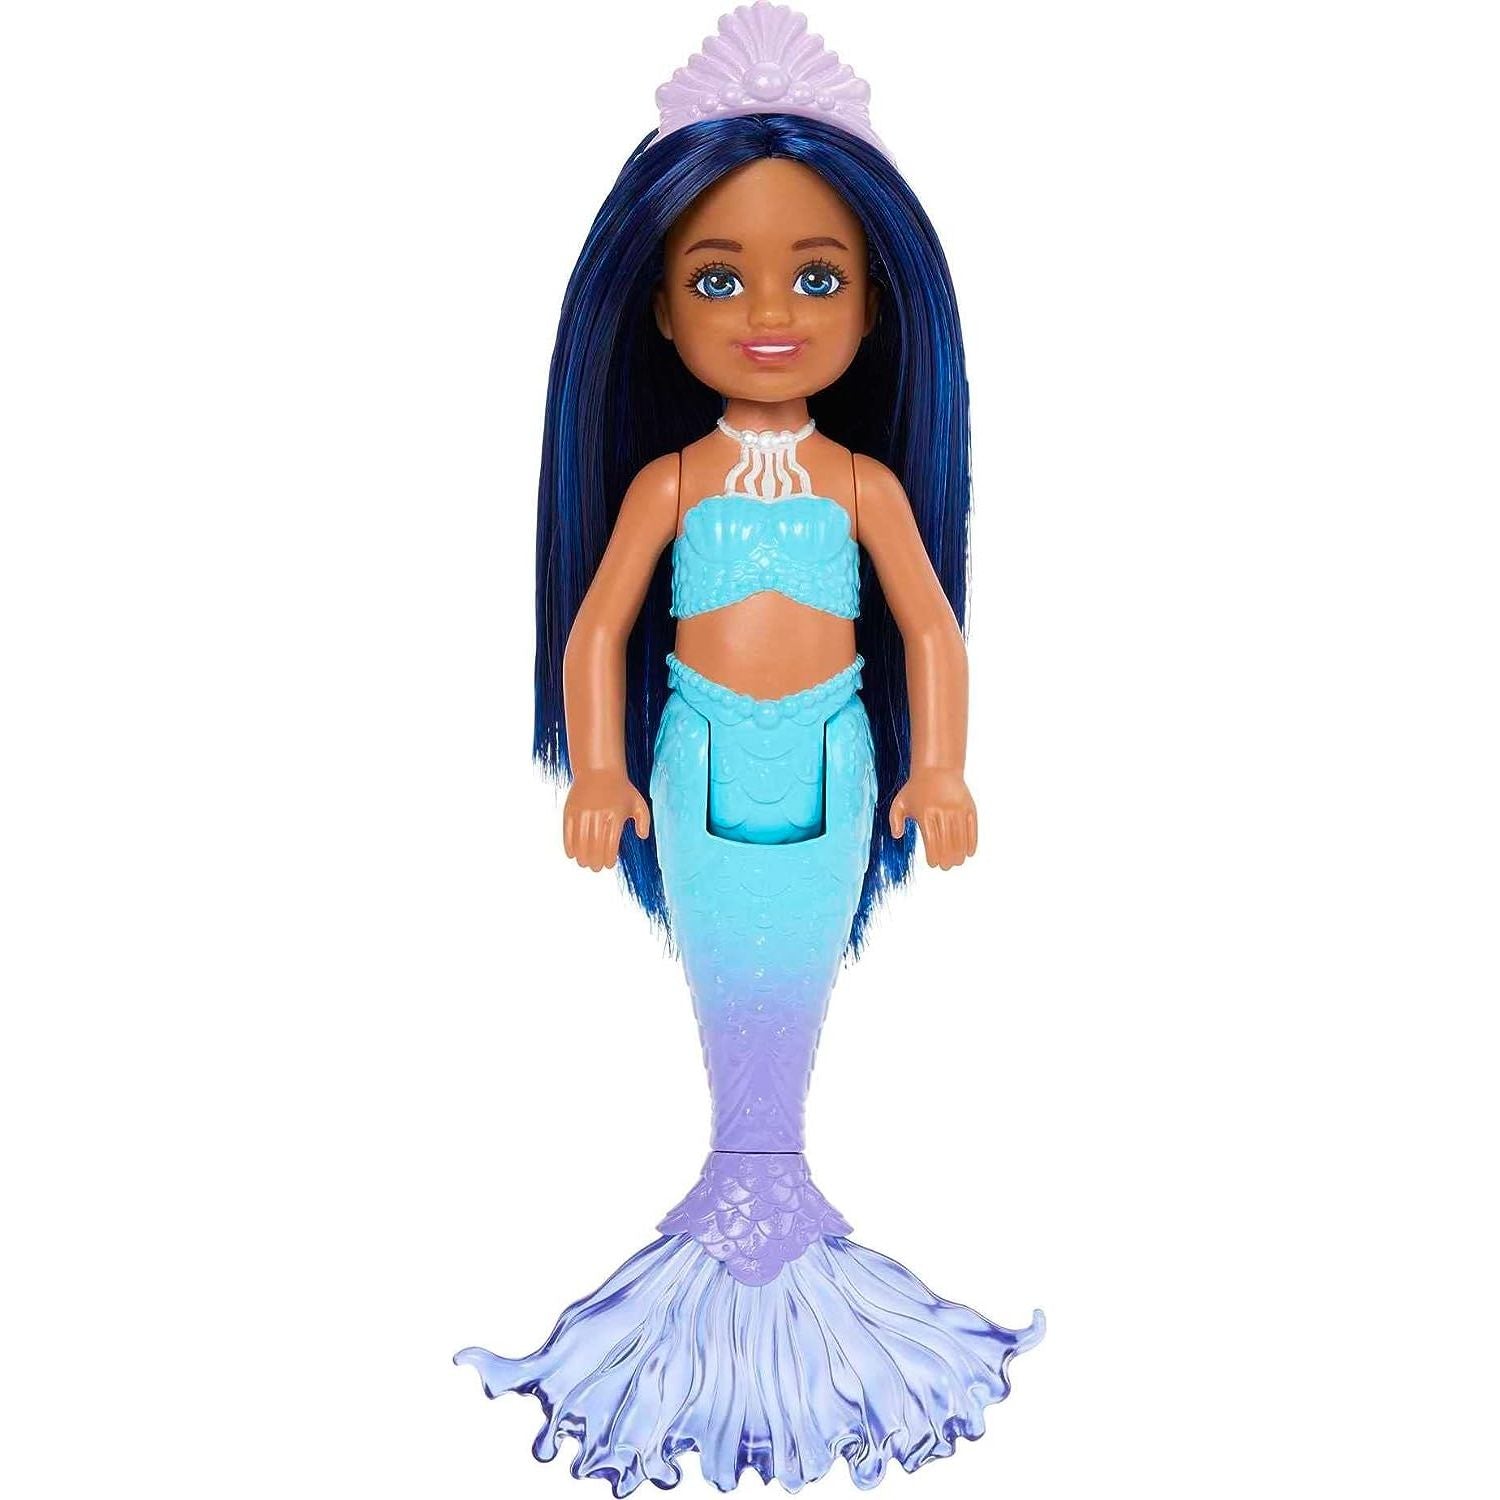 Barbie Mermaid Chelsea Doll with Midnight Blue Hair and Ombre Tail, Mermaid Toys, Crown Accessory Brand: Barbie